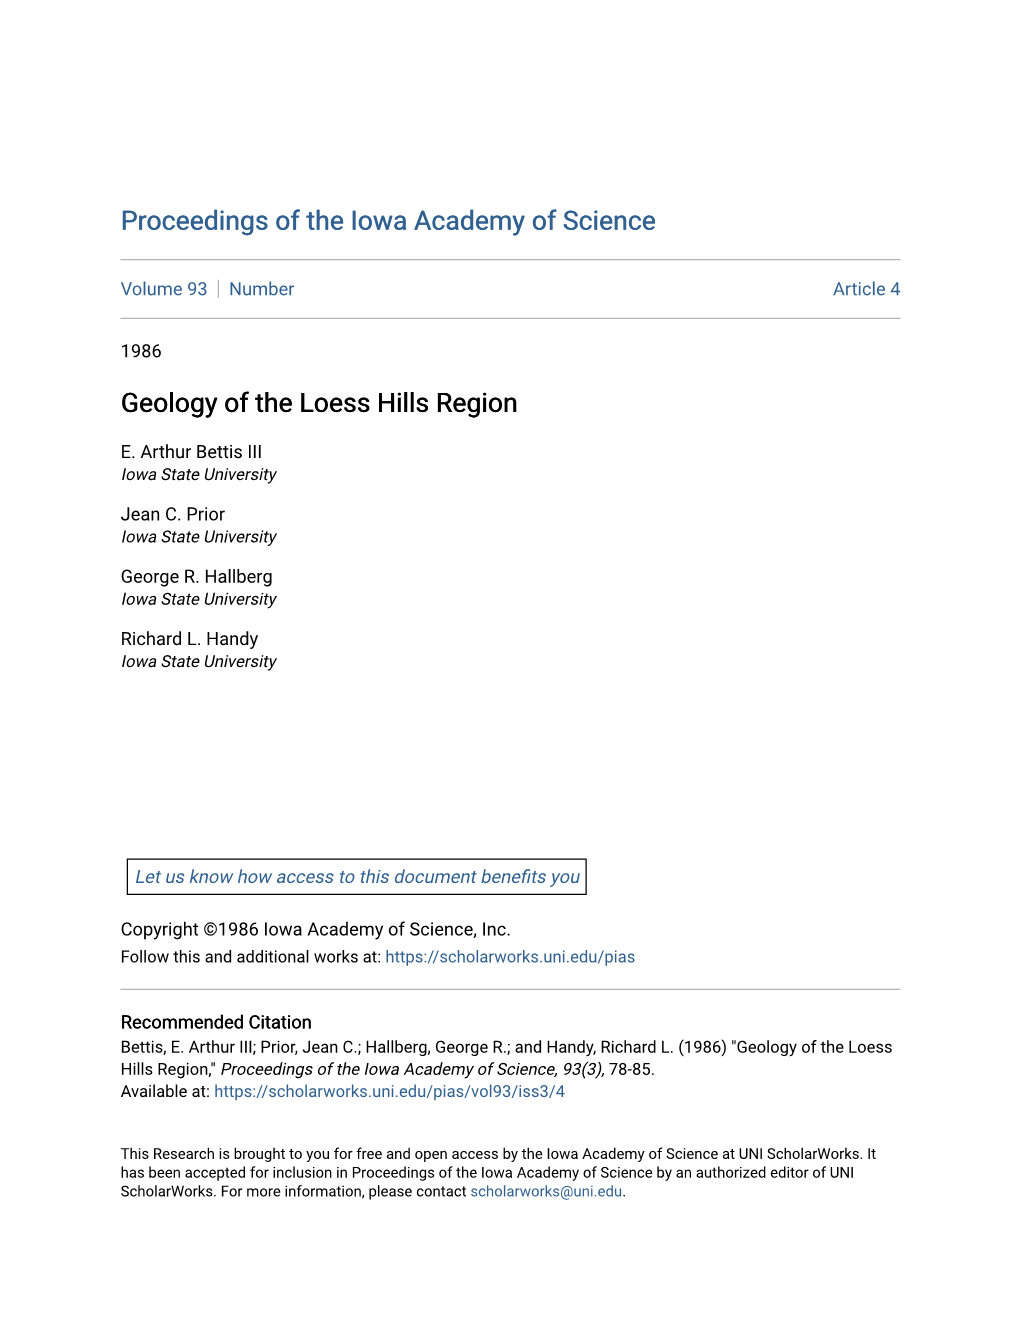 Geology of the Loess Hills Region